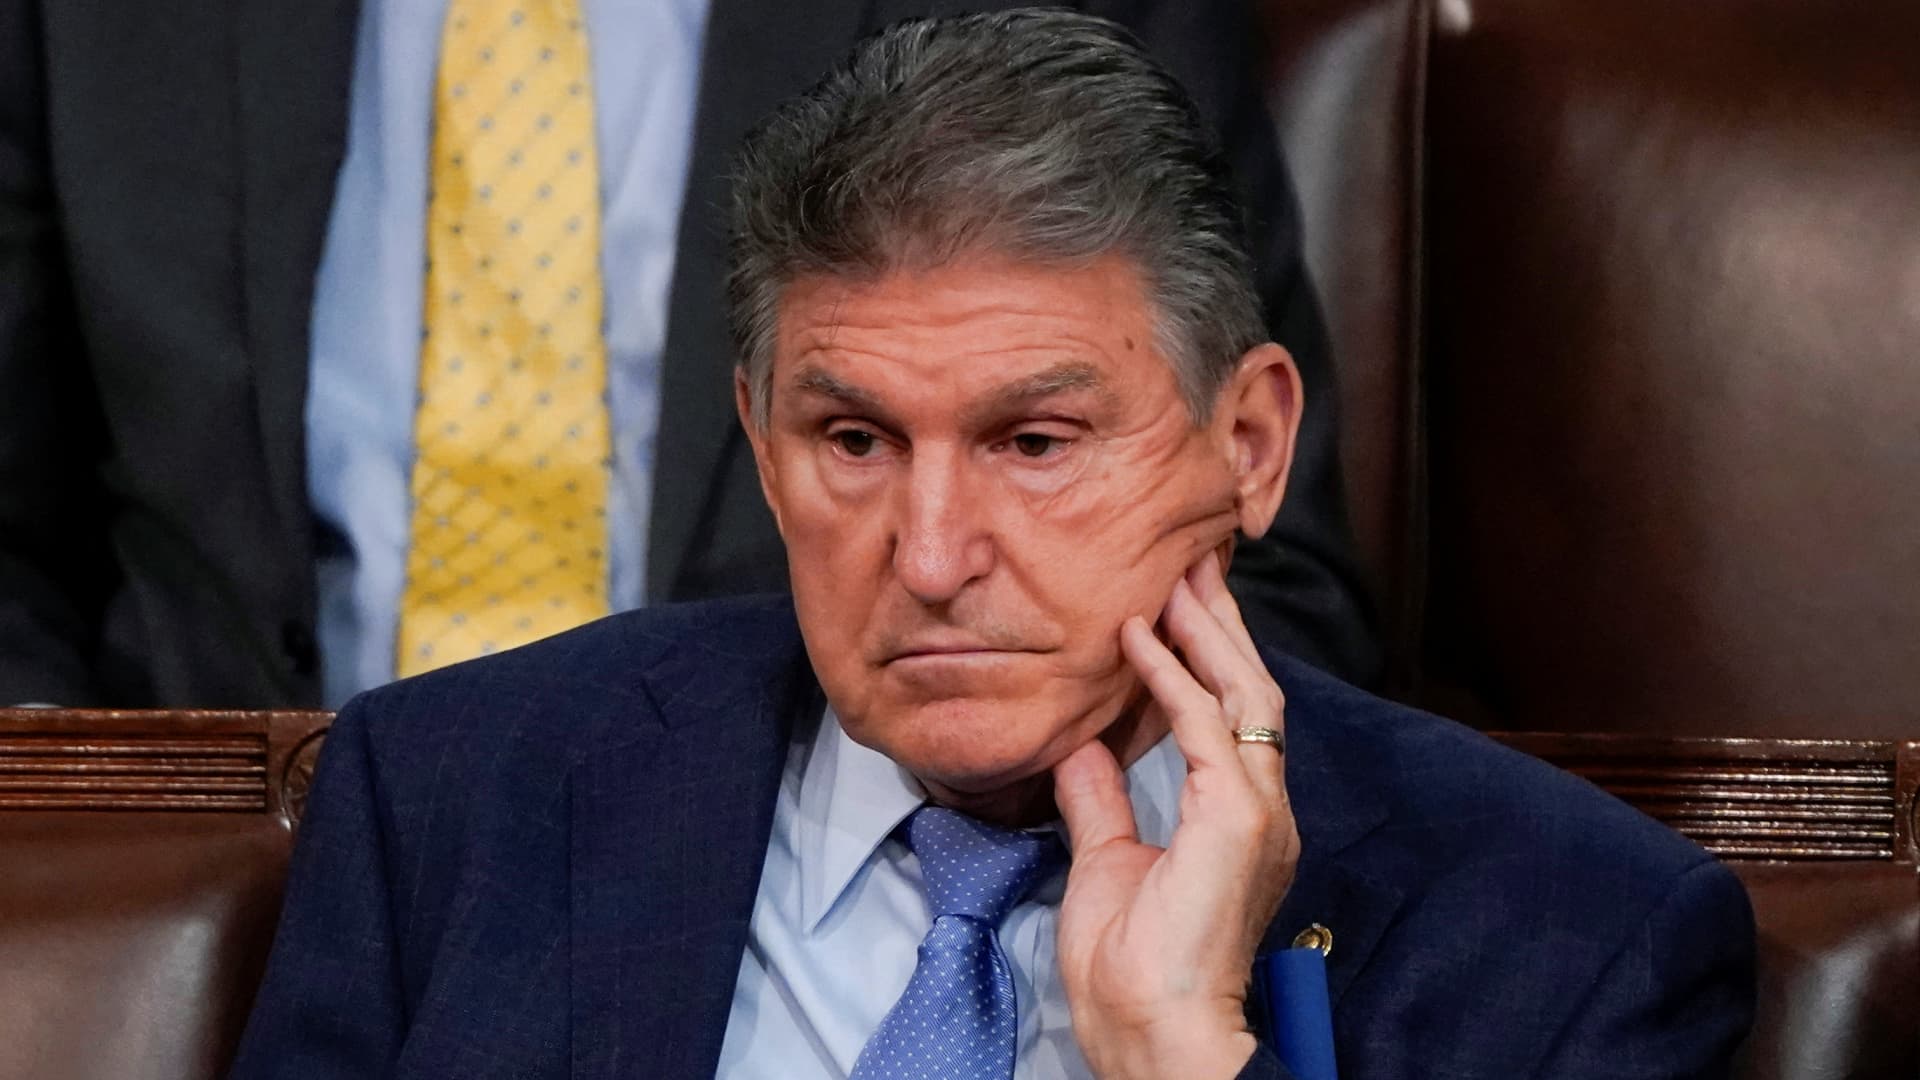 Sen. Joe Manchin (D-WV) listens as U.S. President Joe Biden delivers his first State of the Union address to a joint session of Congress, in the U.S. Capitol in Washington, DC, U.S., March 1. 2022.